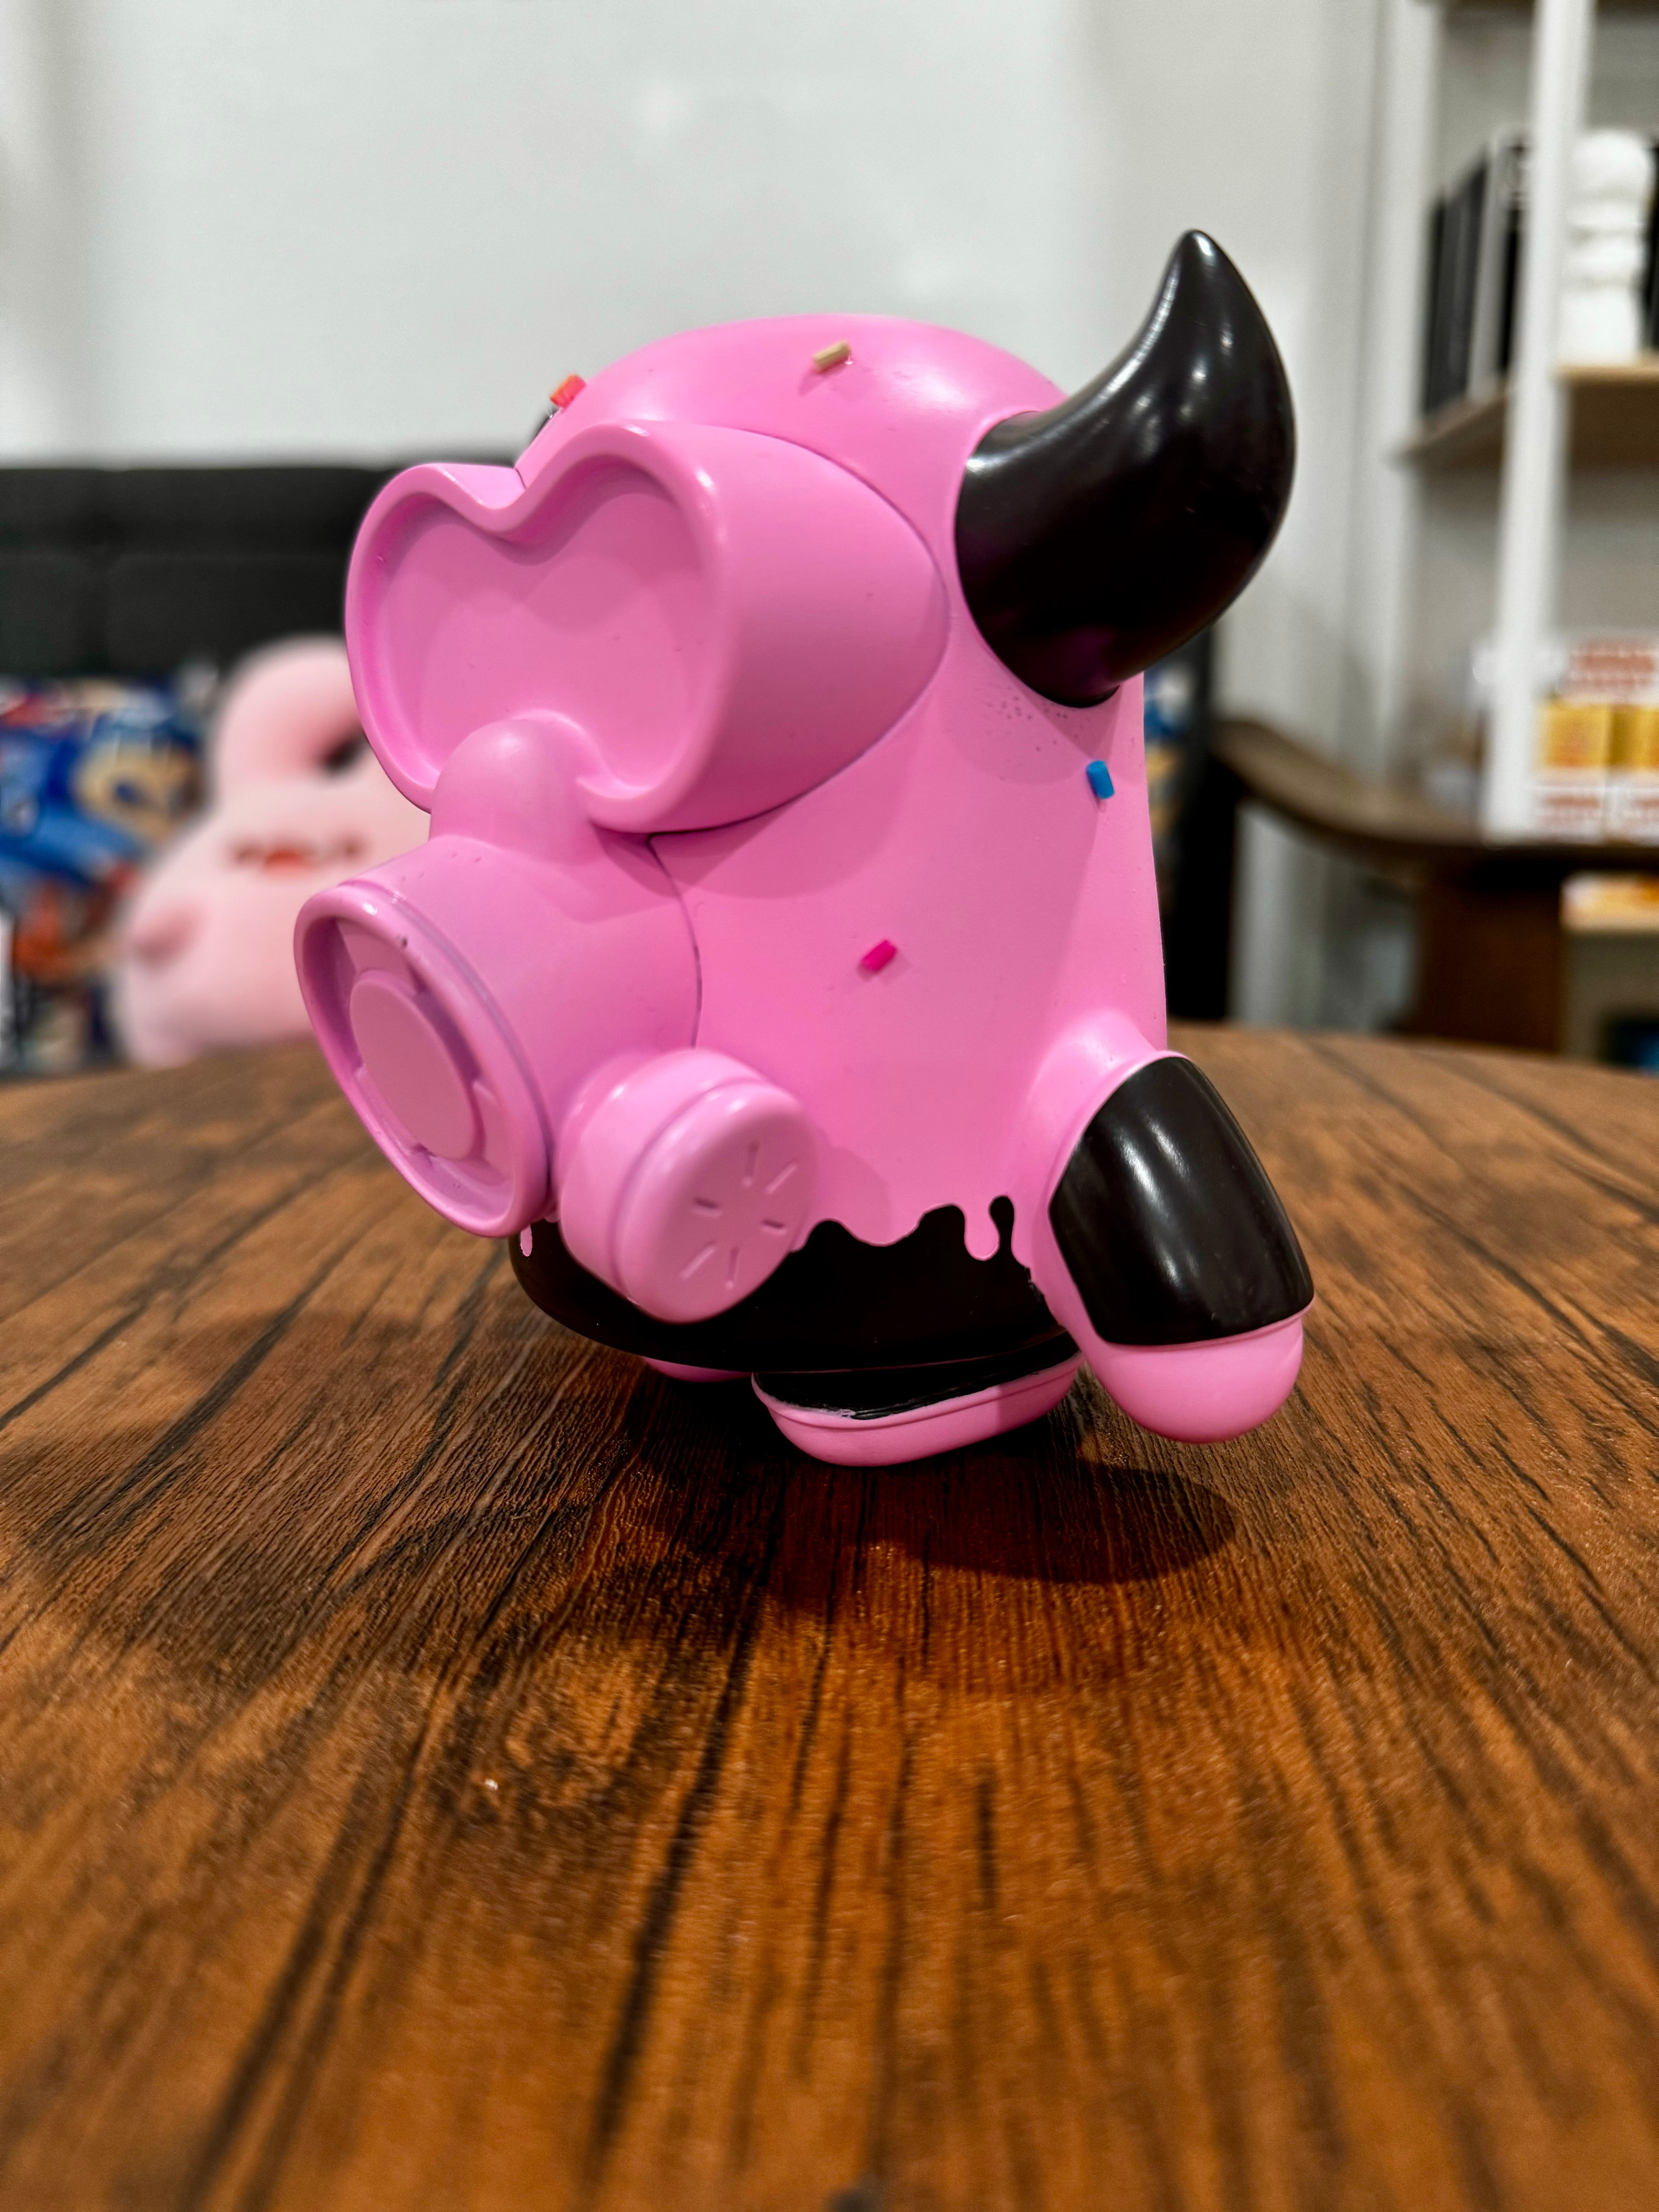 A pink Sofubi toy resembling a bull with horns and a gas mask, titled MASK BULL StrawBerry Spray Chocolate by CO2. Characteristic of Strangecat Toys' blind box and art toy store.